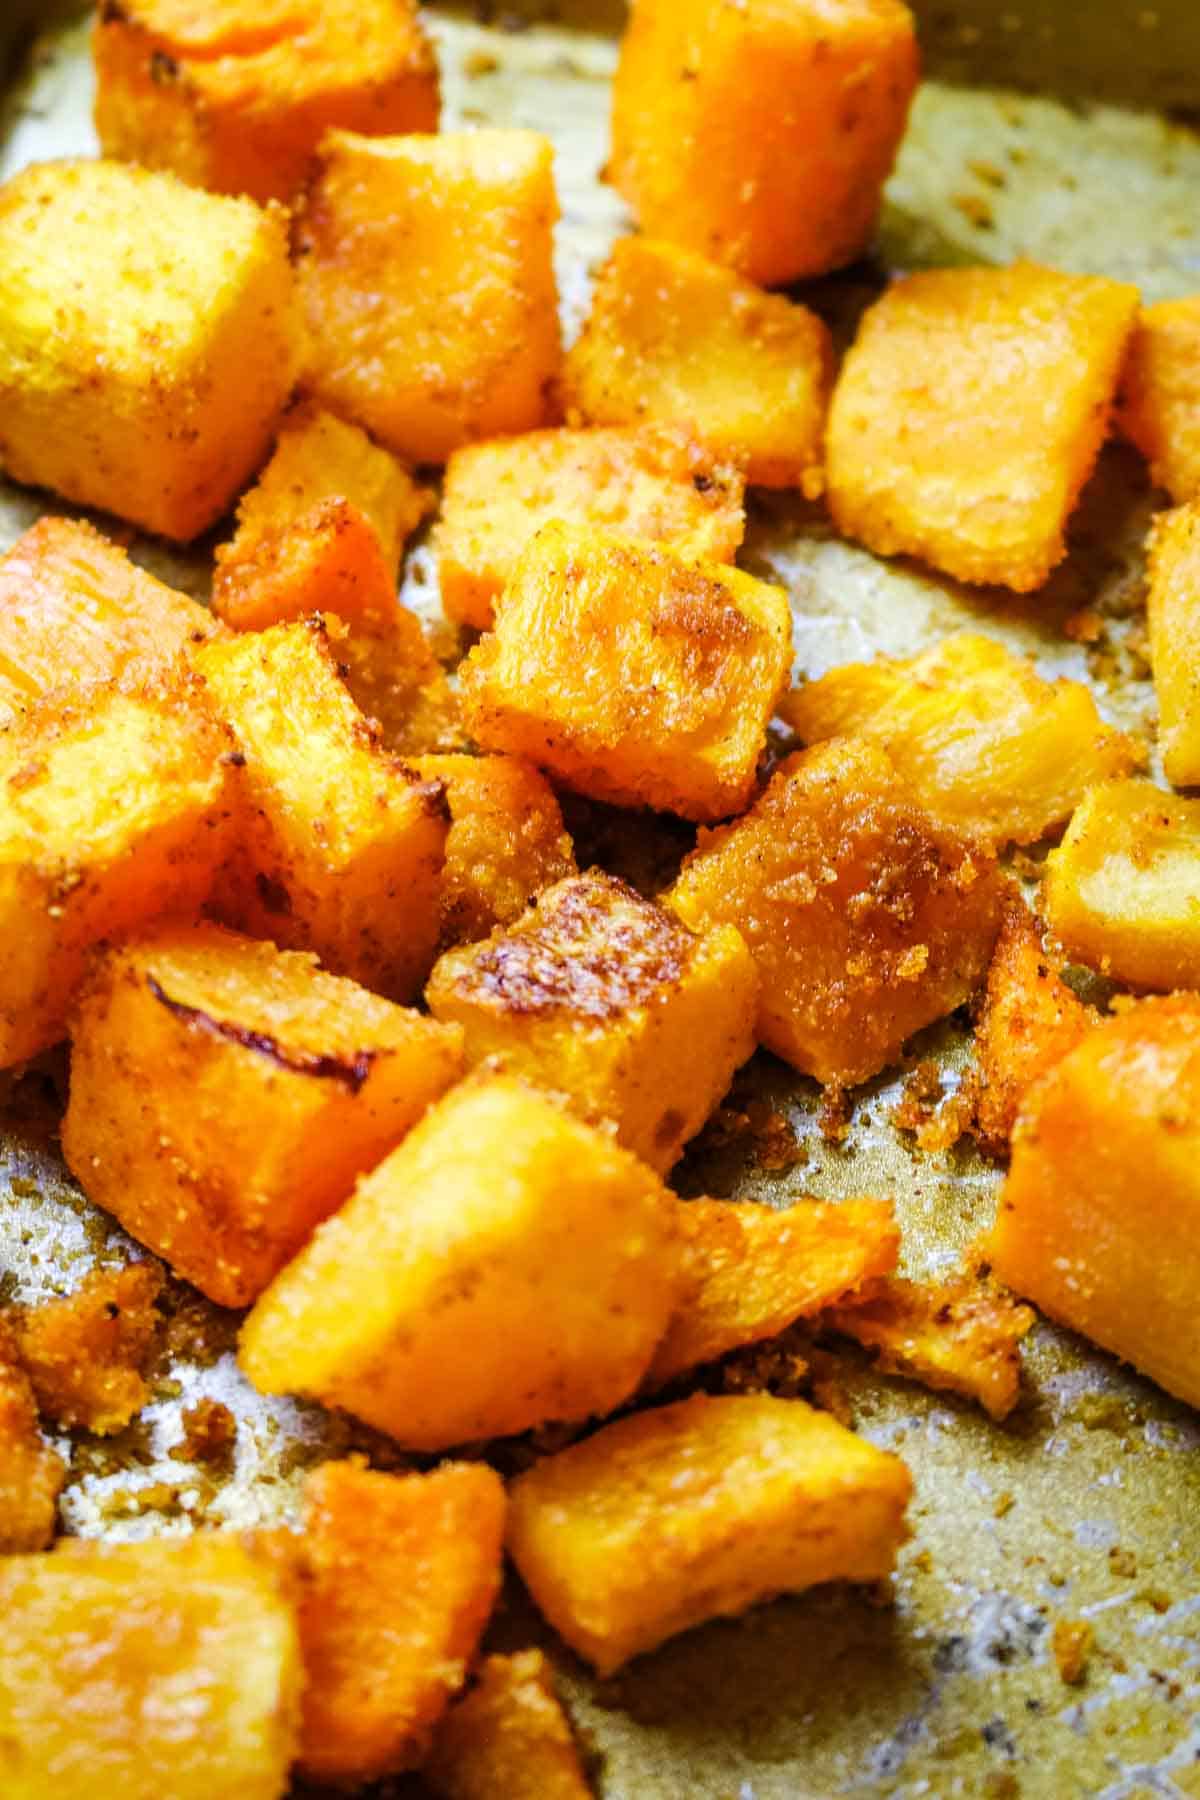 roasted butternut squash cubes on sheet.